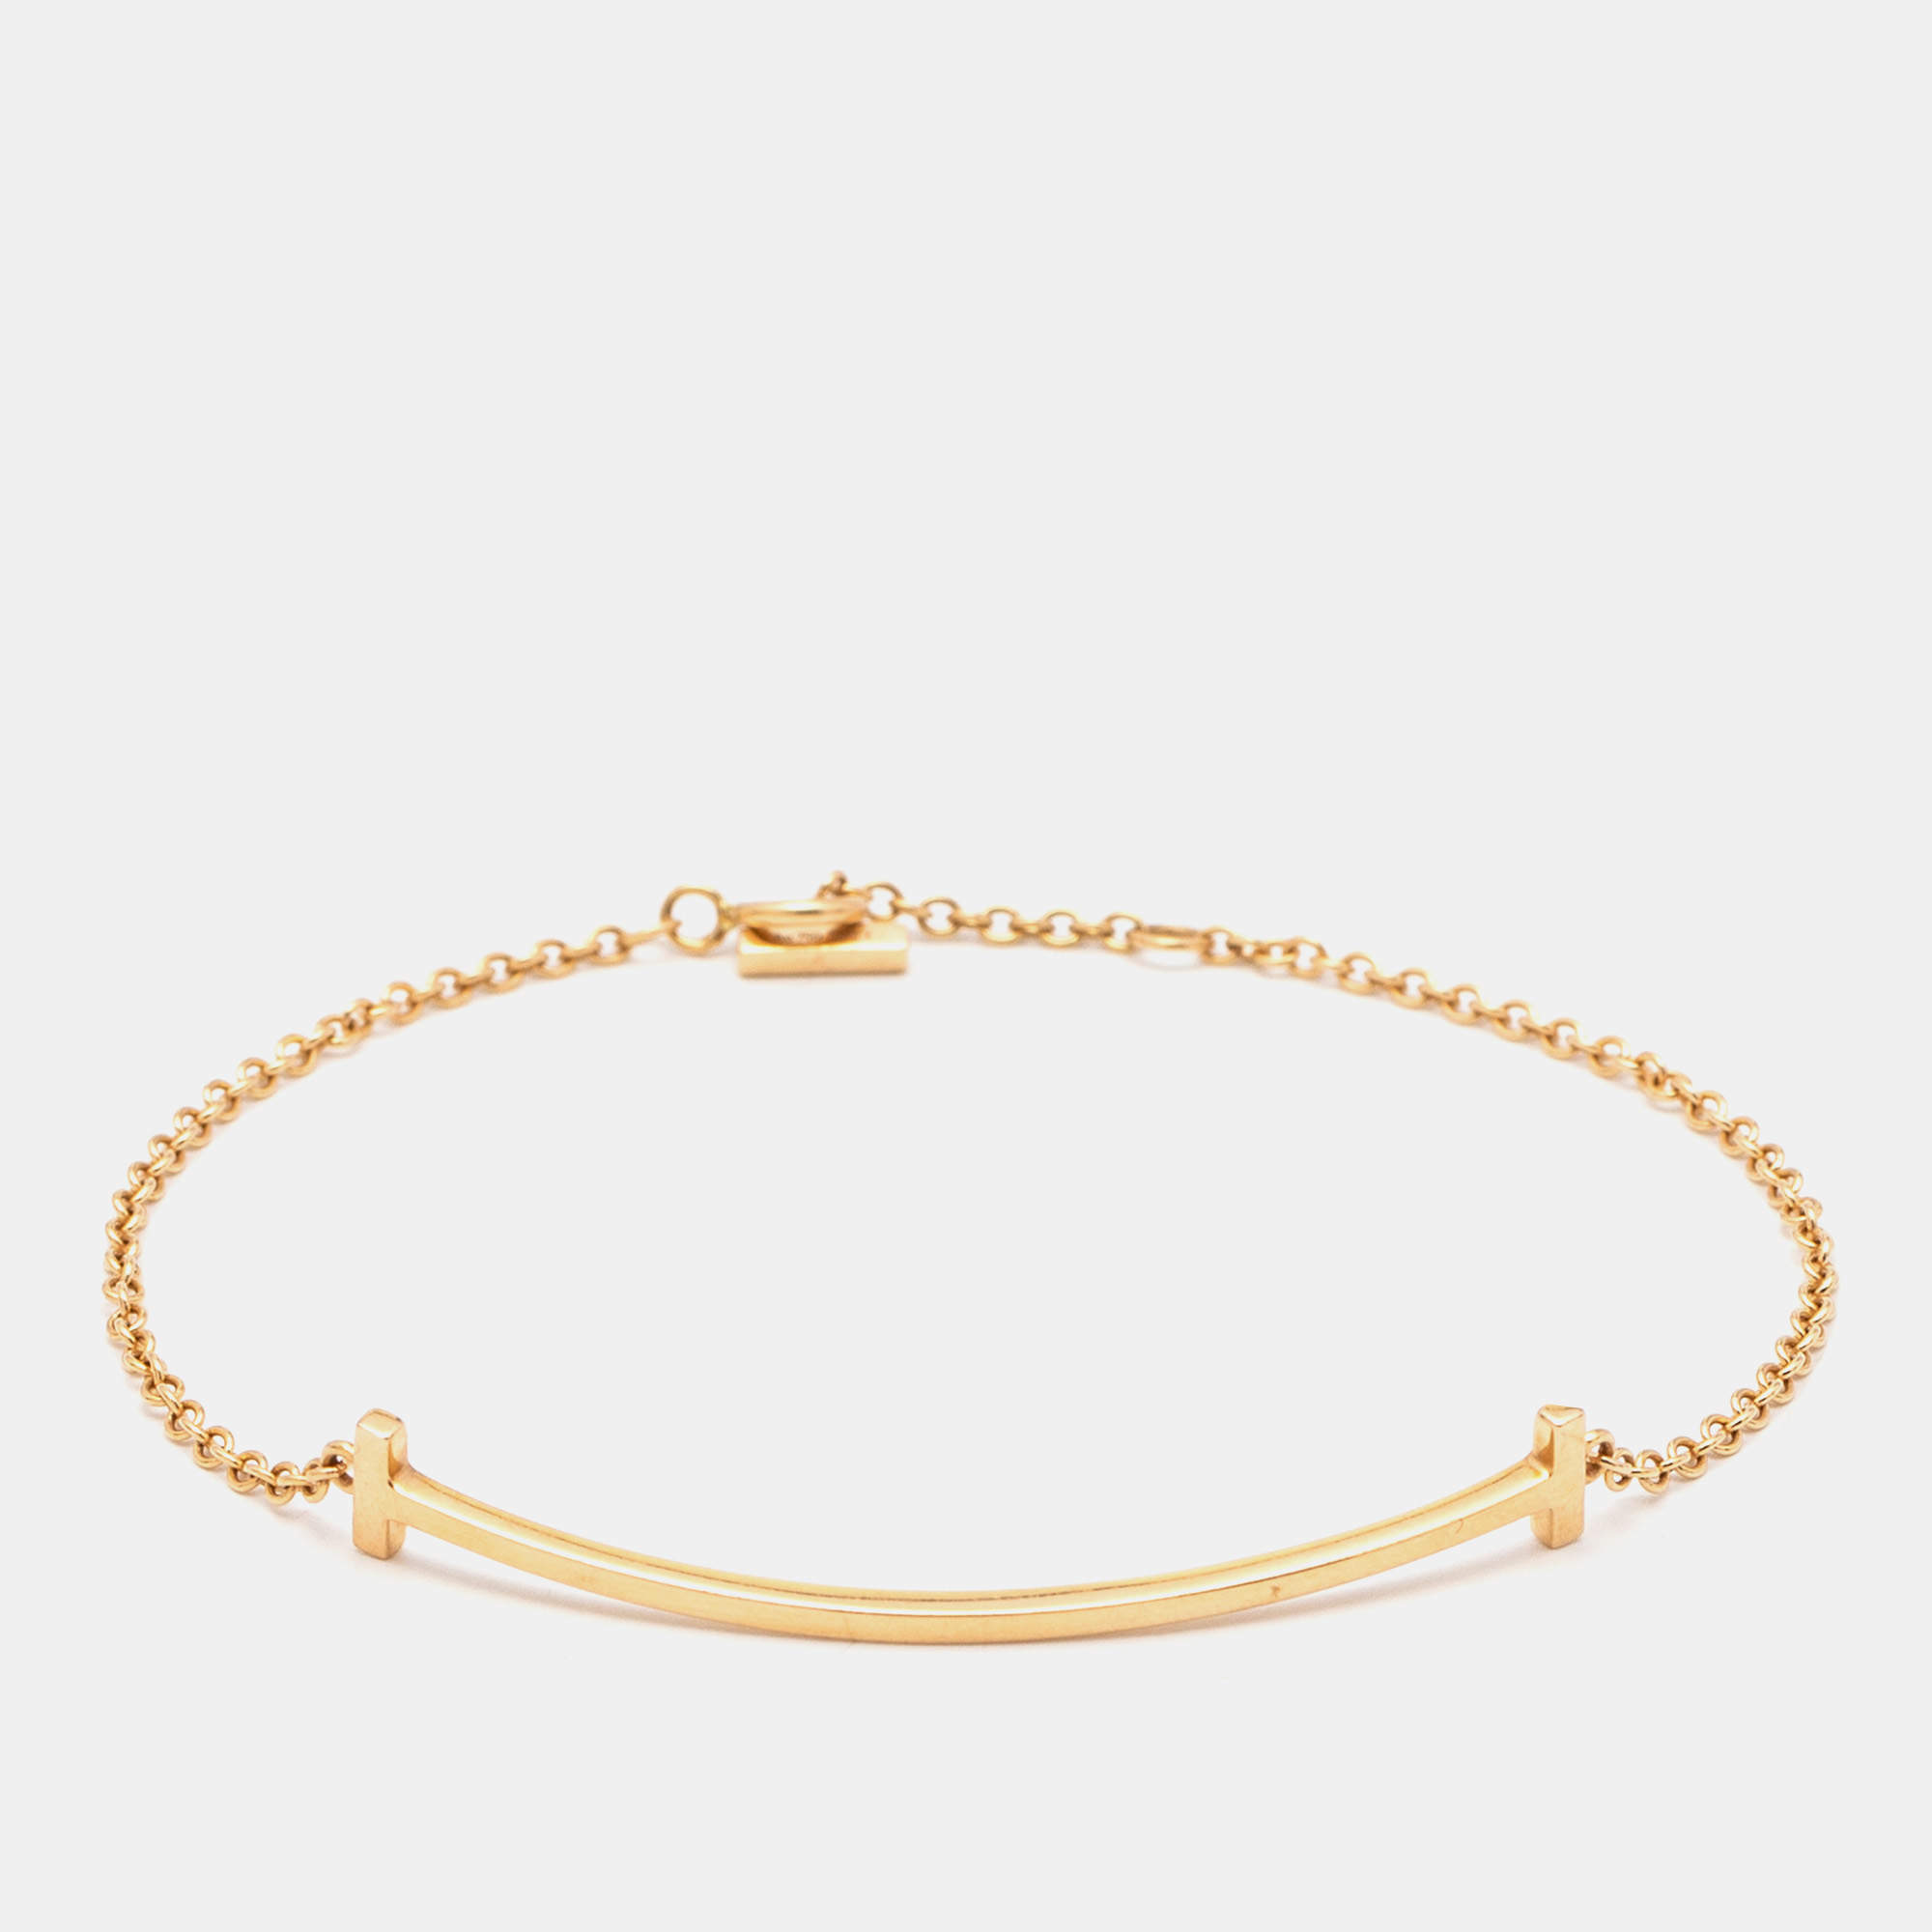 Tiffany T Smile Bracelet in Yellow Gold on a Black Cord